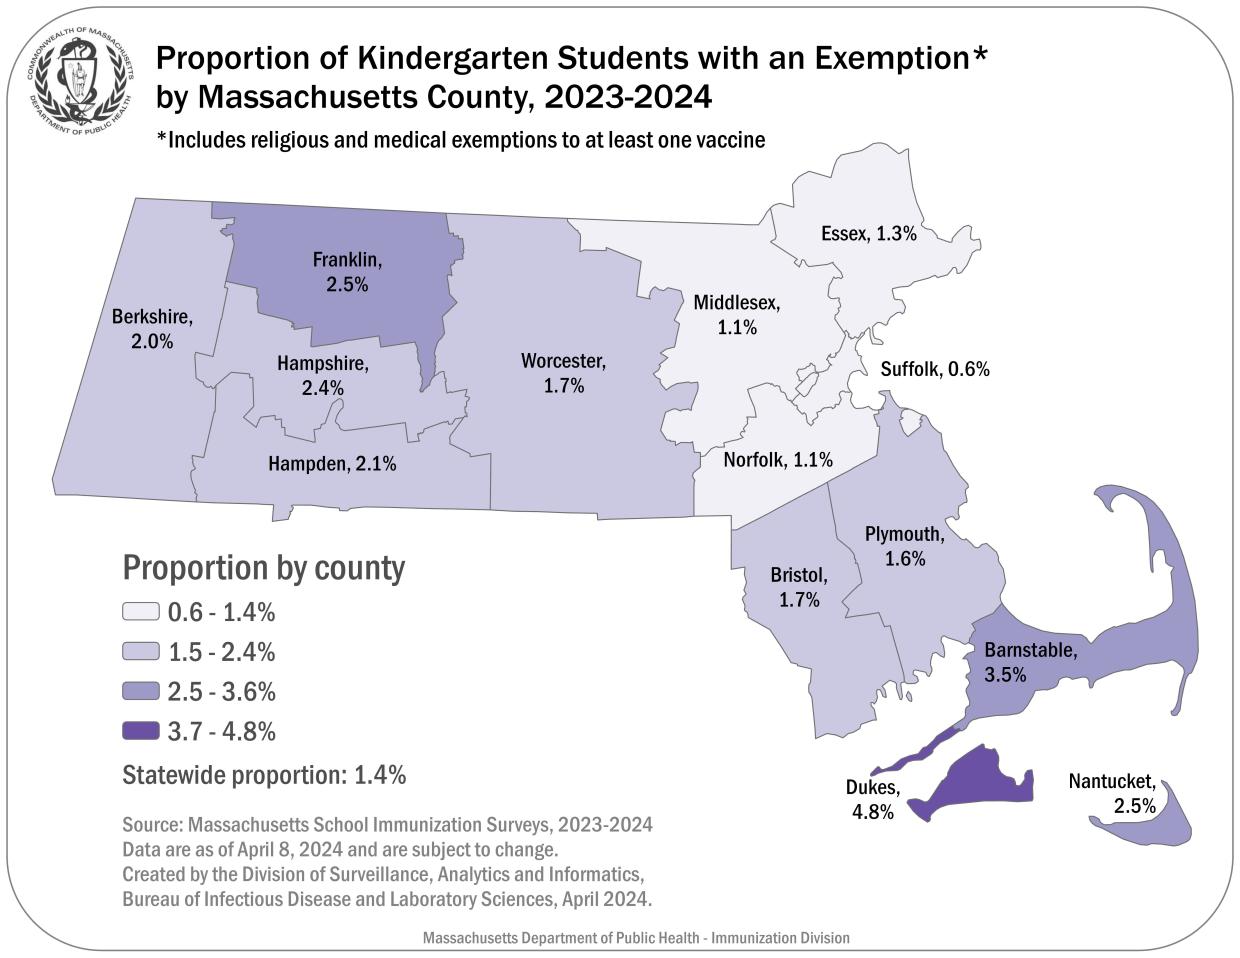 This map shows the proportion of Kindergarten Students by Mass County with an Exemption, 2023-2024. These are religious and medical exemptions combined. These data are current as of 4/8/24 and are subject to change. The source of these data is via the Mass School Immunization Surveys 2023-2024. State average 1.4% Barnstable 3.5% Berkshire 2.0% Bristol 1.7% Dukes 4.8% Hampden 2.1% Hampshire 2.4% Essex 1.3% Franklin 2.5% Middlesex 1.1% Nantucket 2.5% Norfolk 1.1% Plymouth: 1.6% Suffolk 0.6% Worcester 1.7%